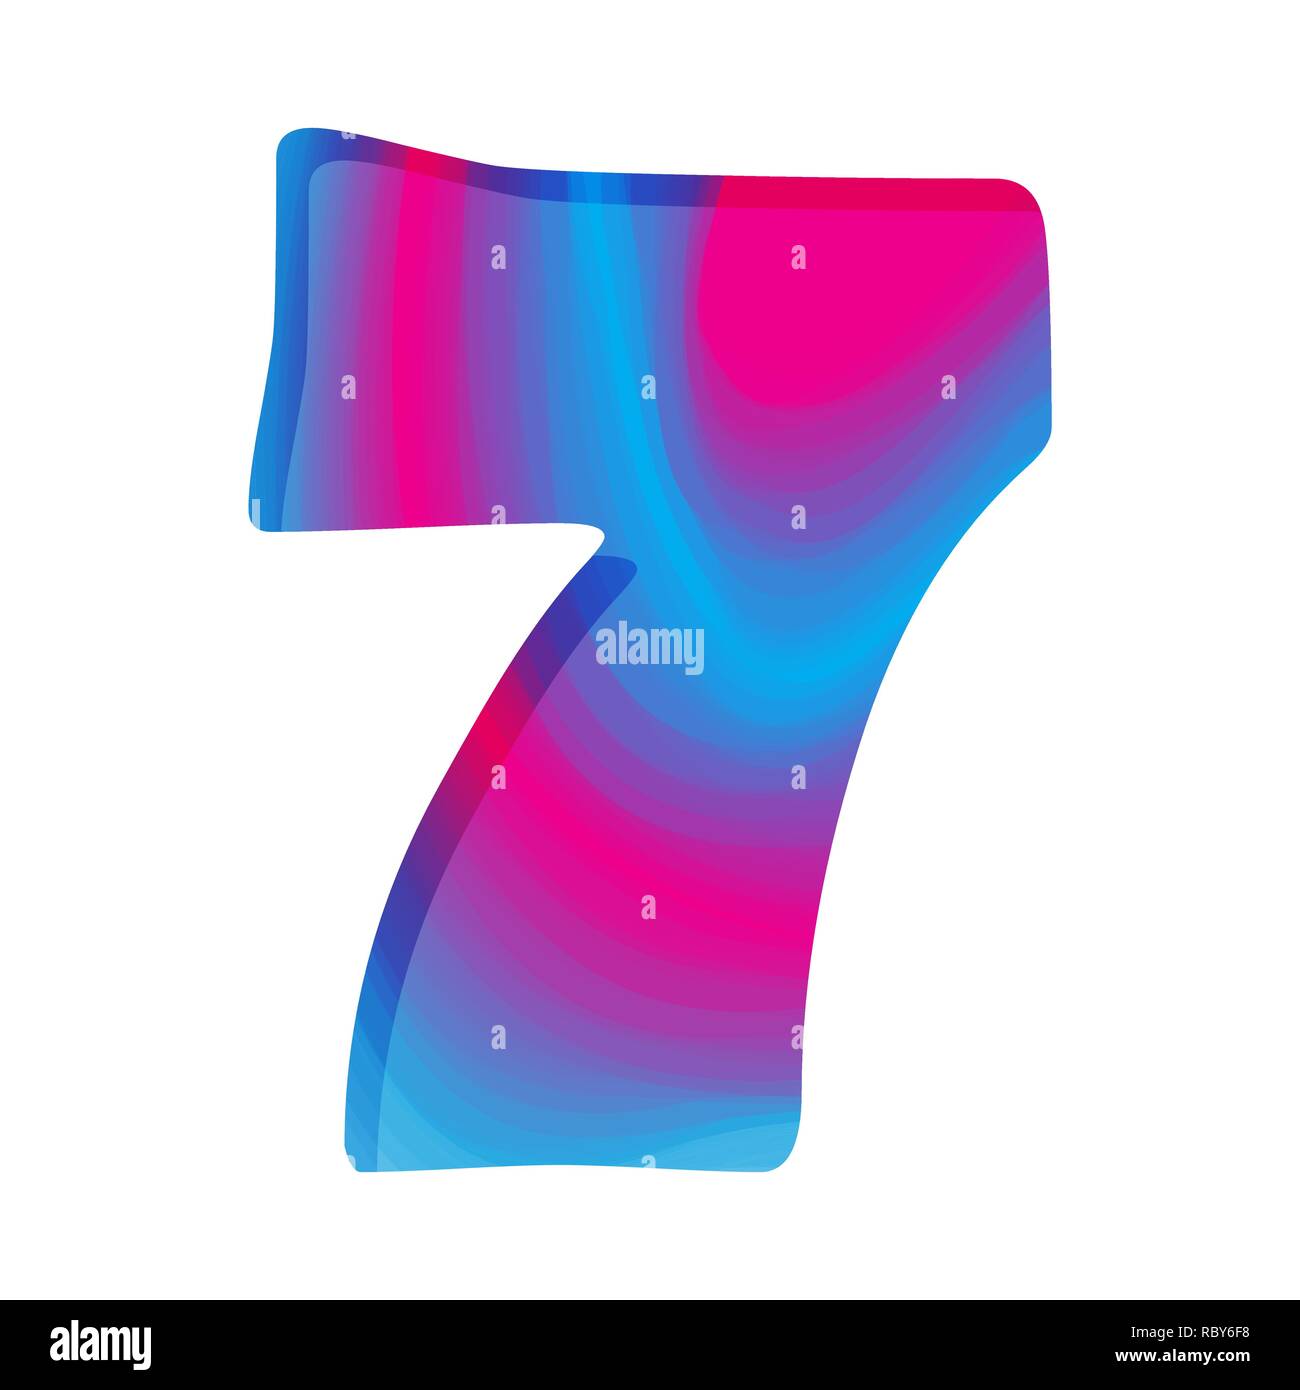 number seven clipart